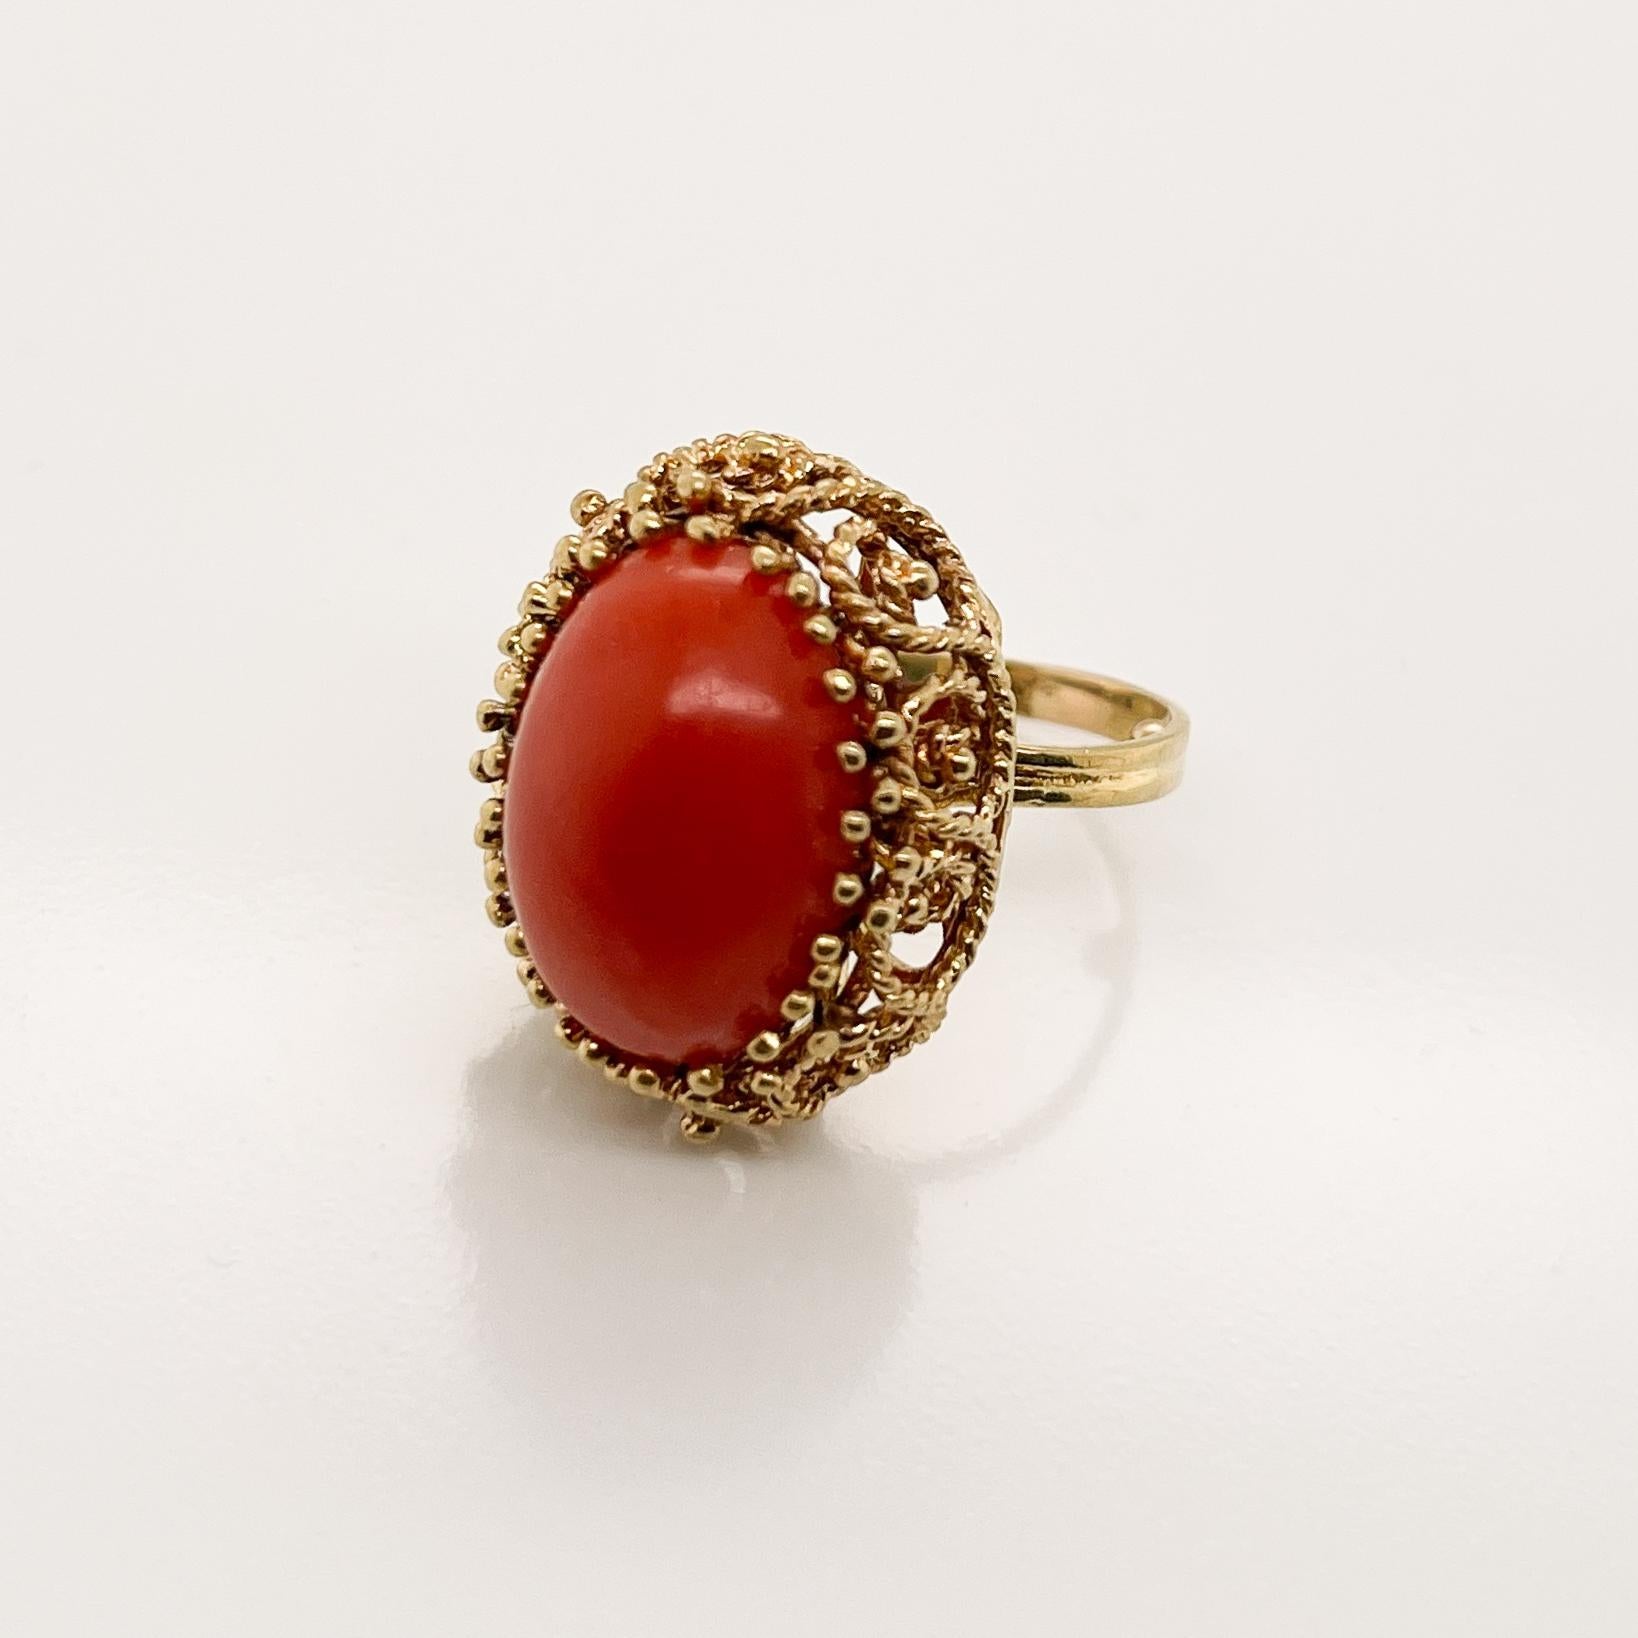 A very fine 14 karat gold and coral cocktail ring.

With a large oval coral cabochon prong-set in 14k gold.  

The bridge and base of the setting are made of twisted wire shaped to form a filigree pattern and are supported on a fused wire shank.

A